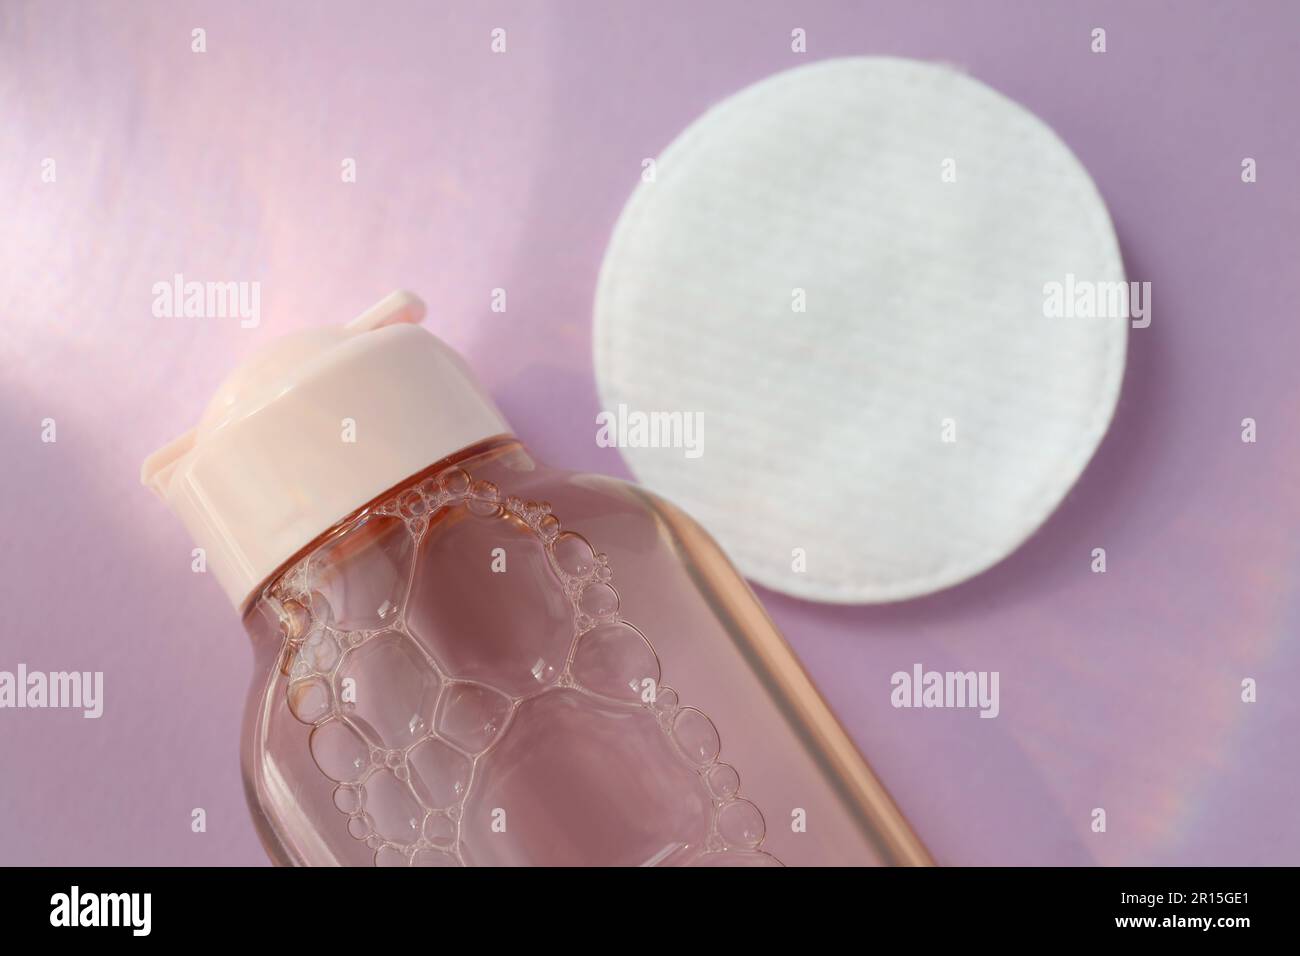 Bottle of micellar water and cotton pad on pink background, closeup Stock Photo